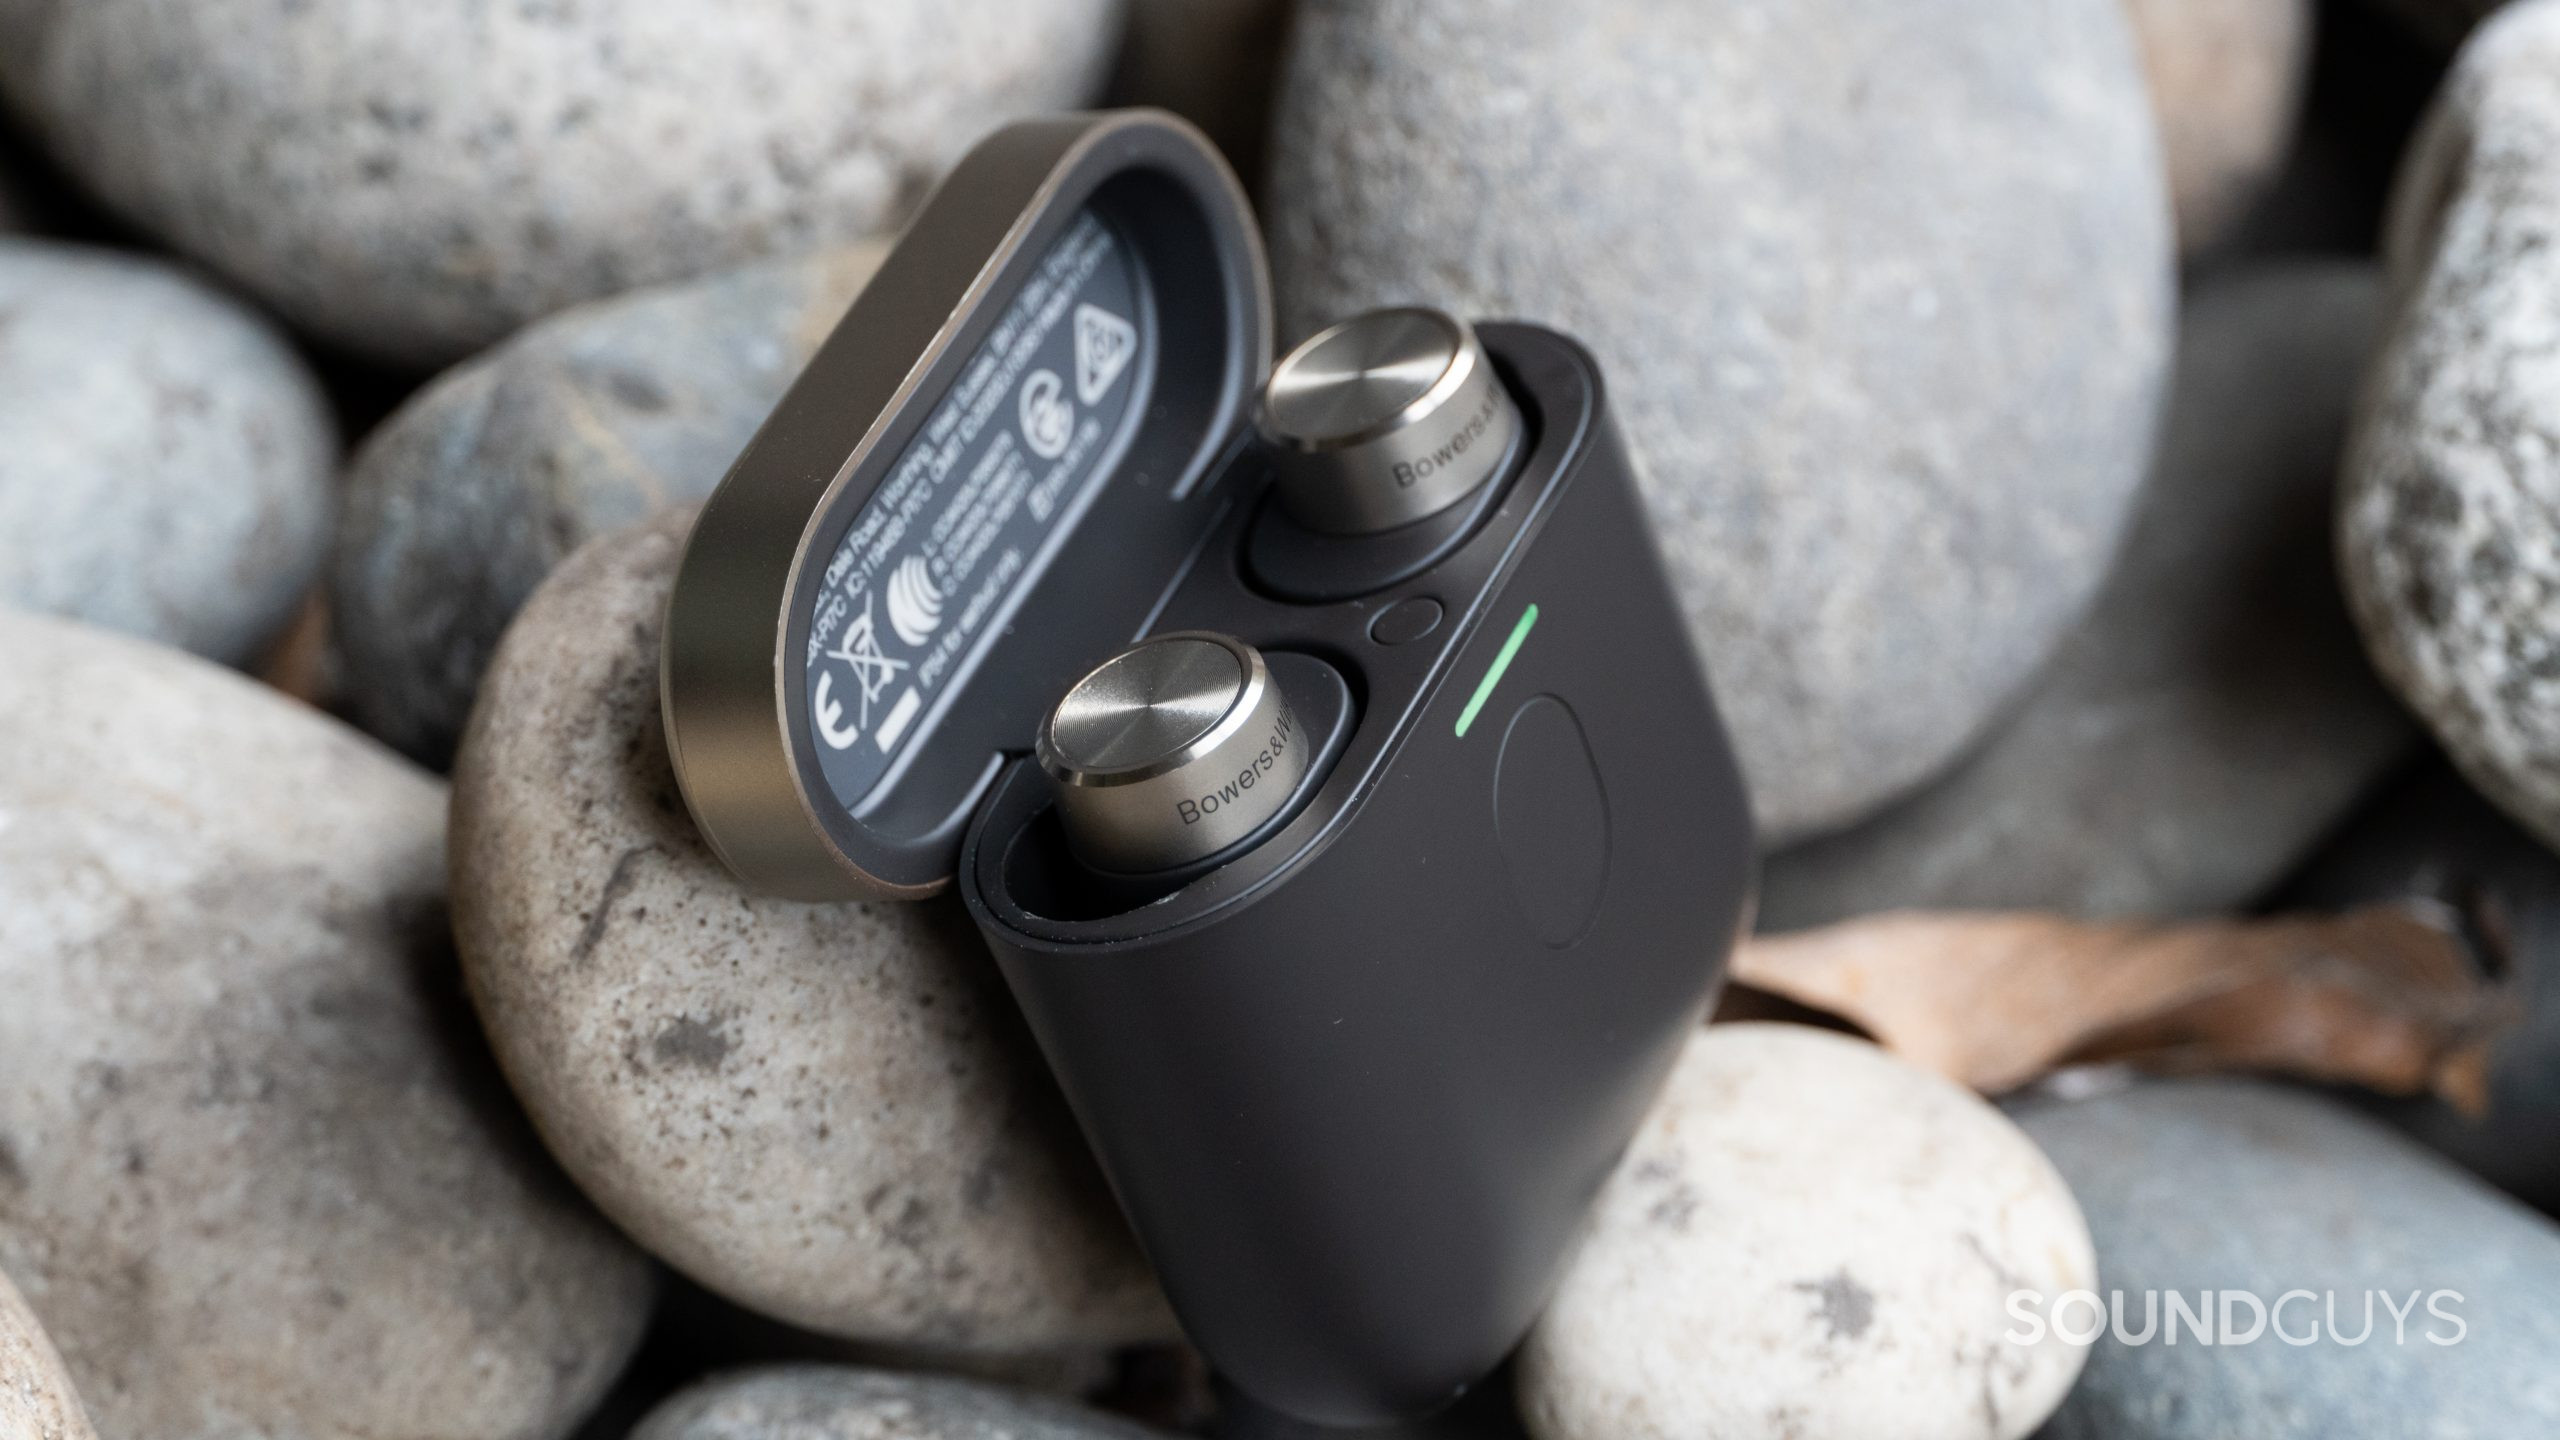 Bowers and Wilkins PI7 earbuds in case resting against rocks.